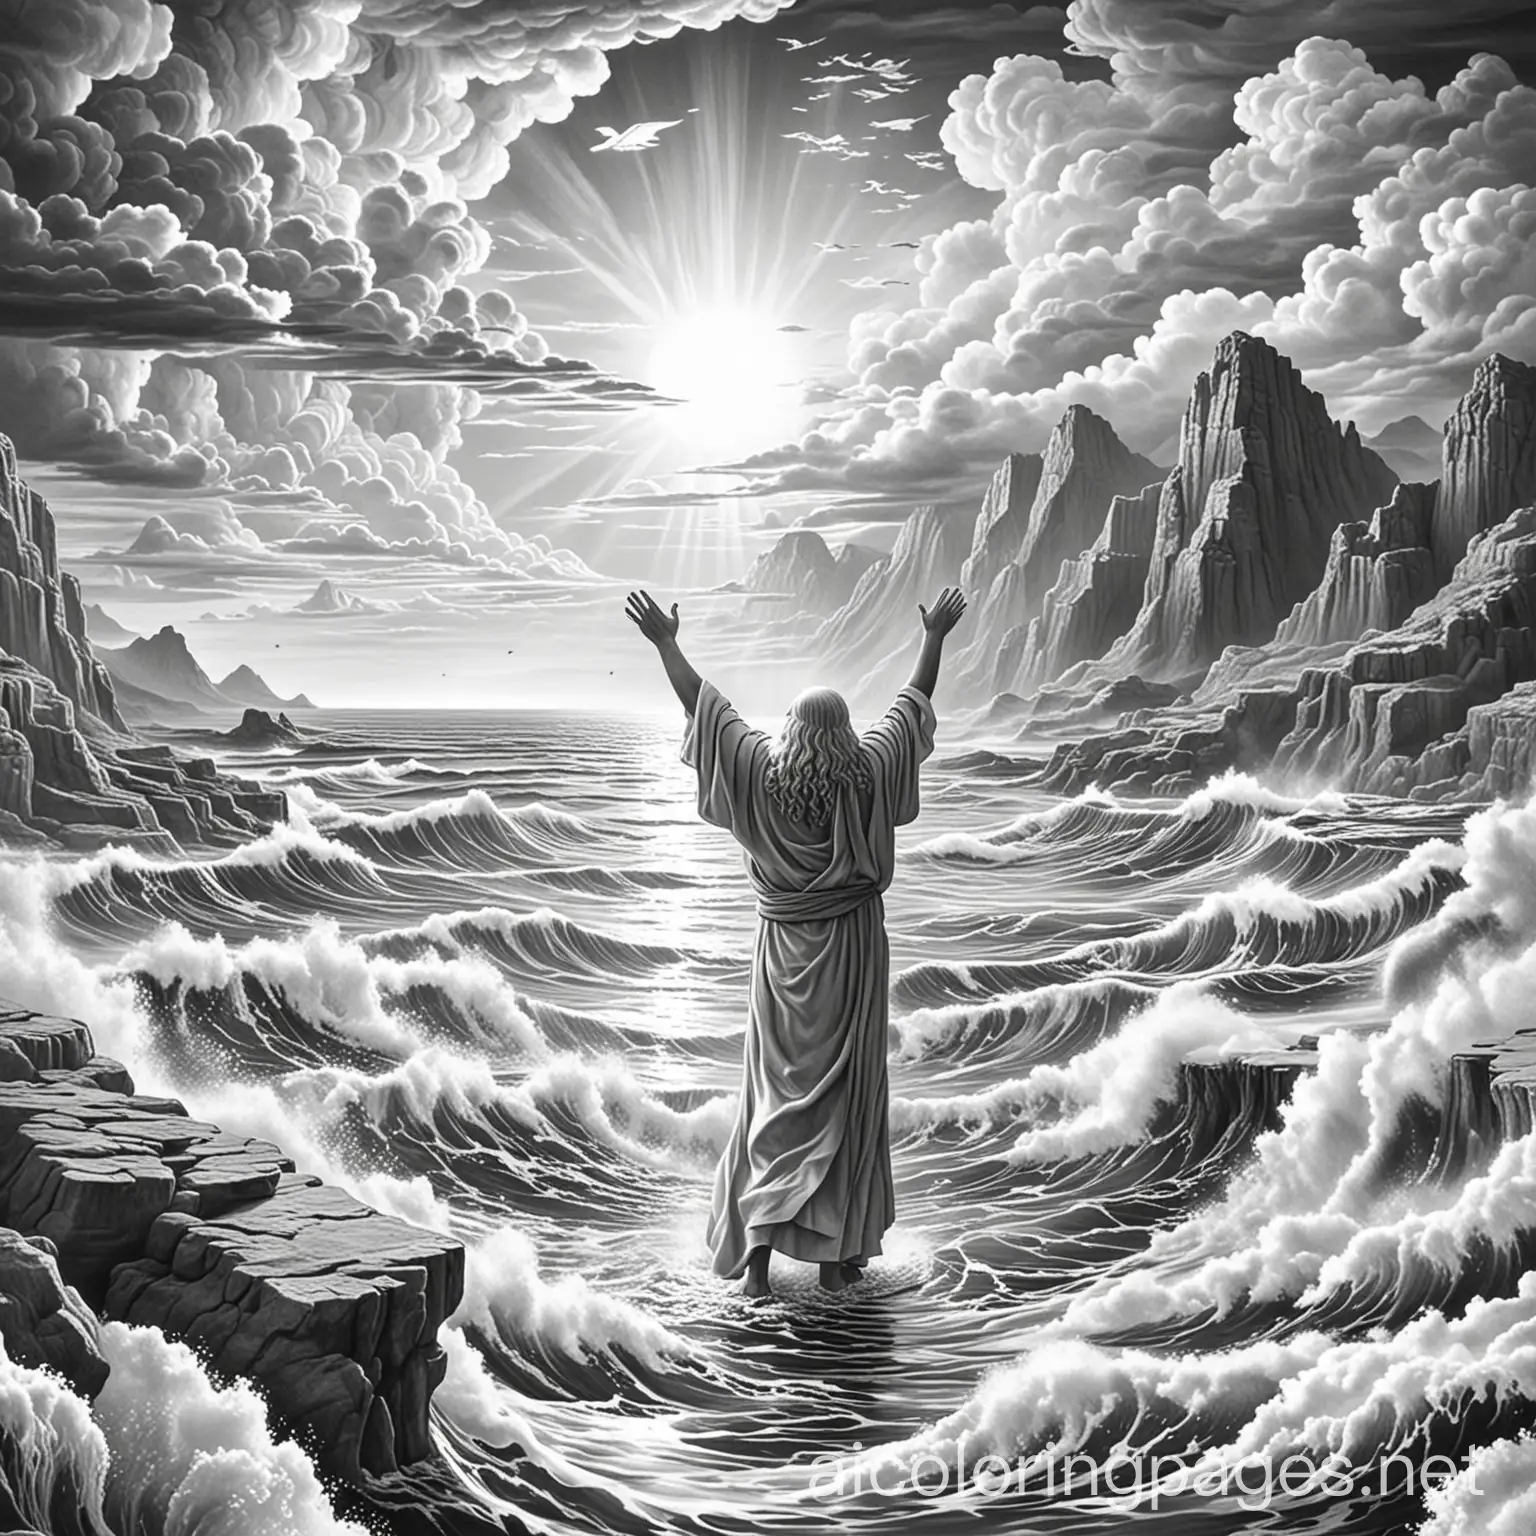 Create a children's coloring page in black and white that shows Moses stretching his arms out to the Red Sea. The Red Sea should be beginning to part. Add clouds in the sky. Add some Israelite families watching the sea part for them. Add some fish in the water.